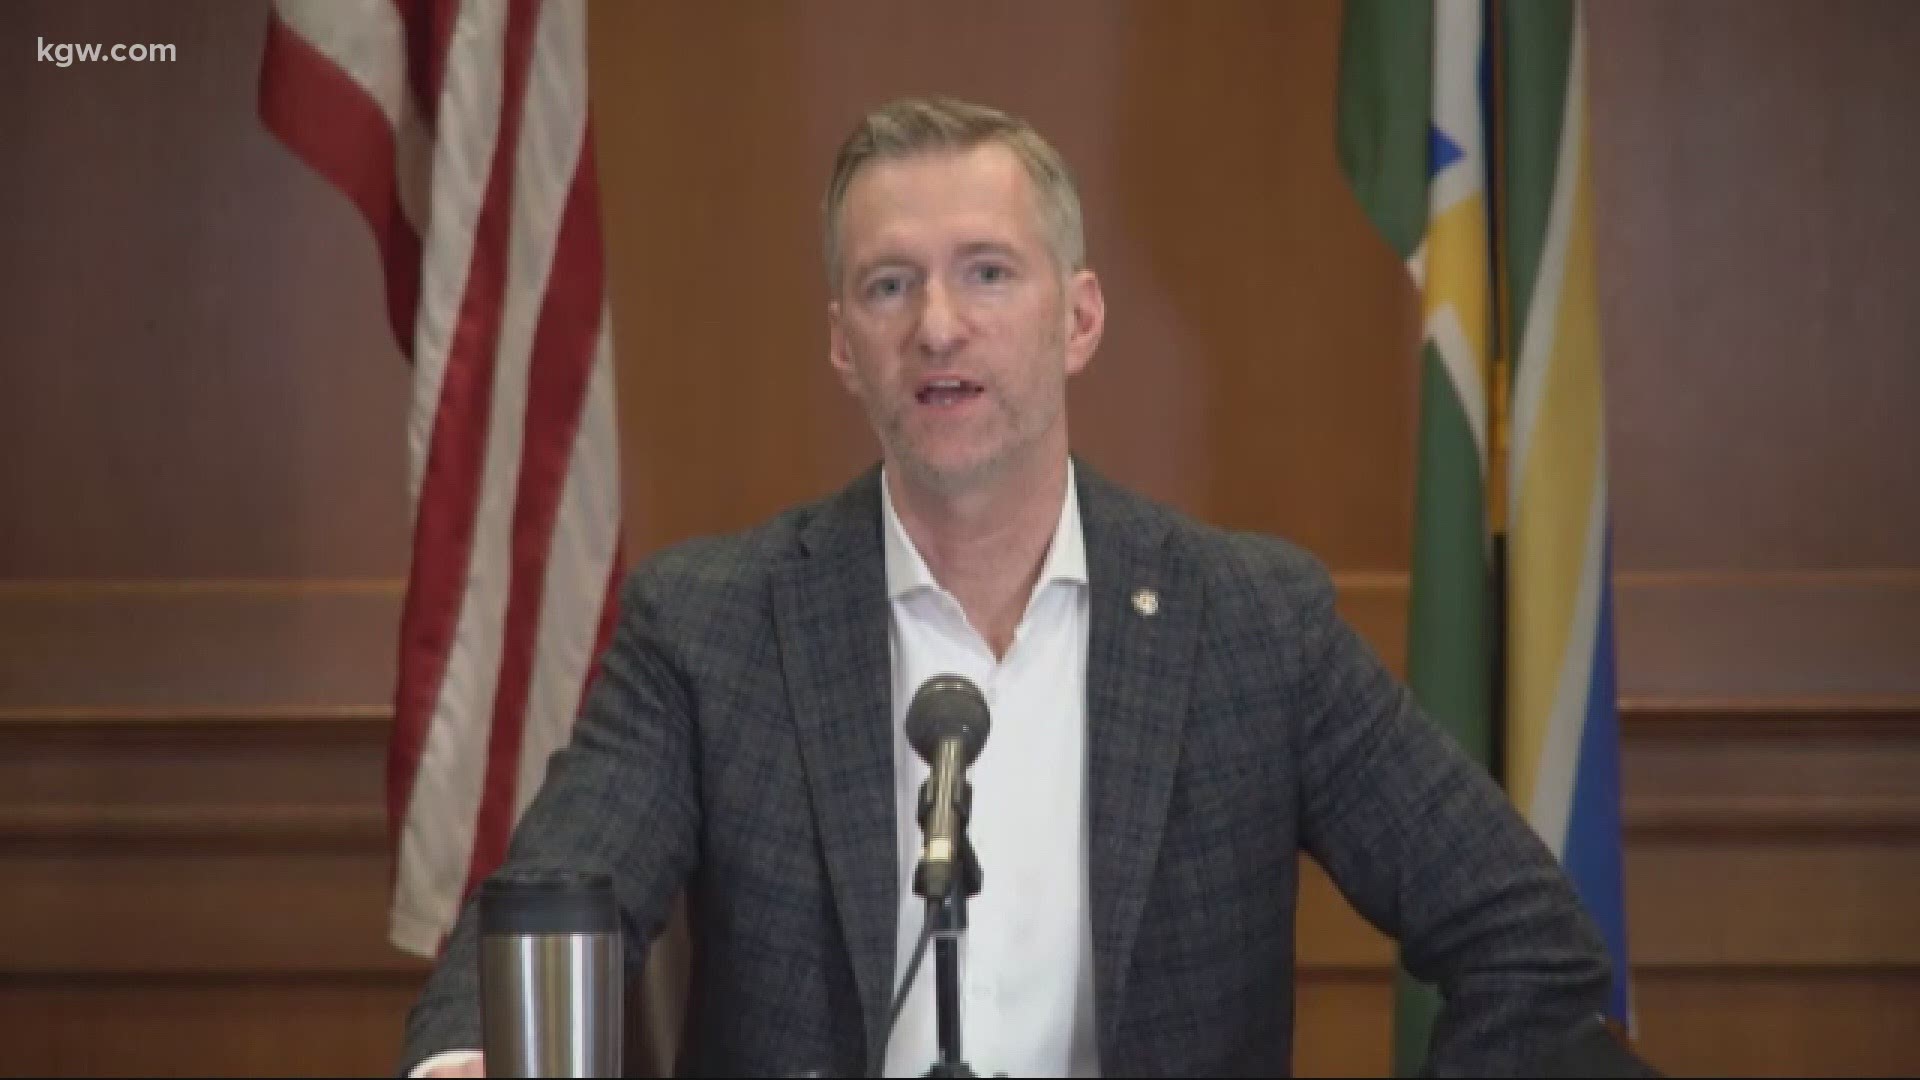 Mayor Ted Wheeler is getting increased security protection after harassment he continues to receive in public.